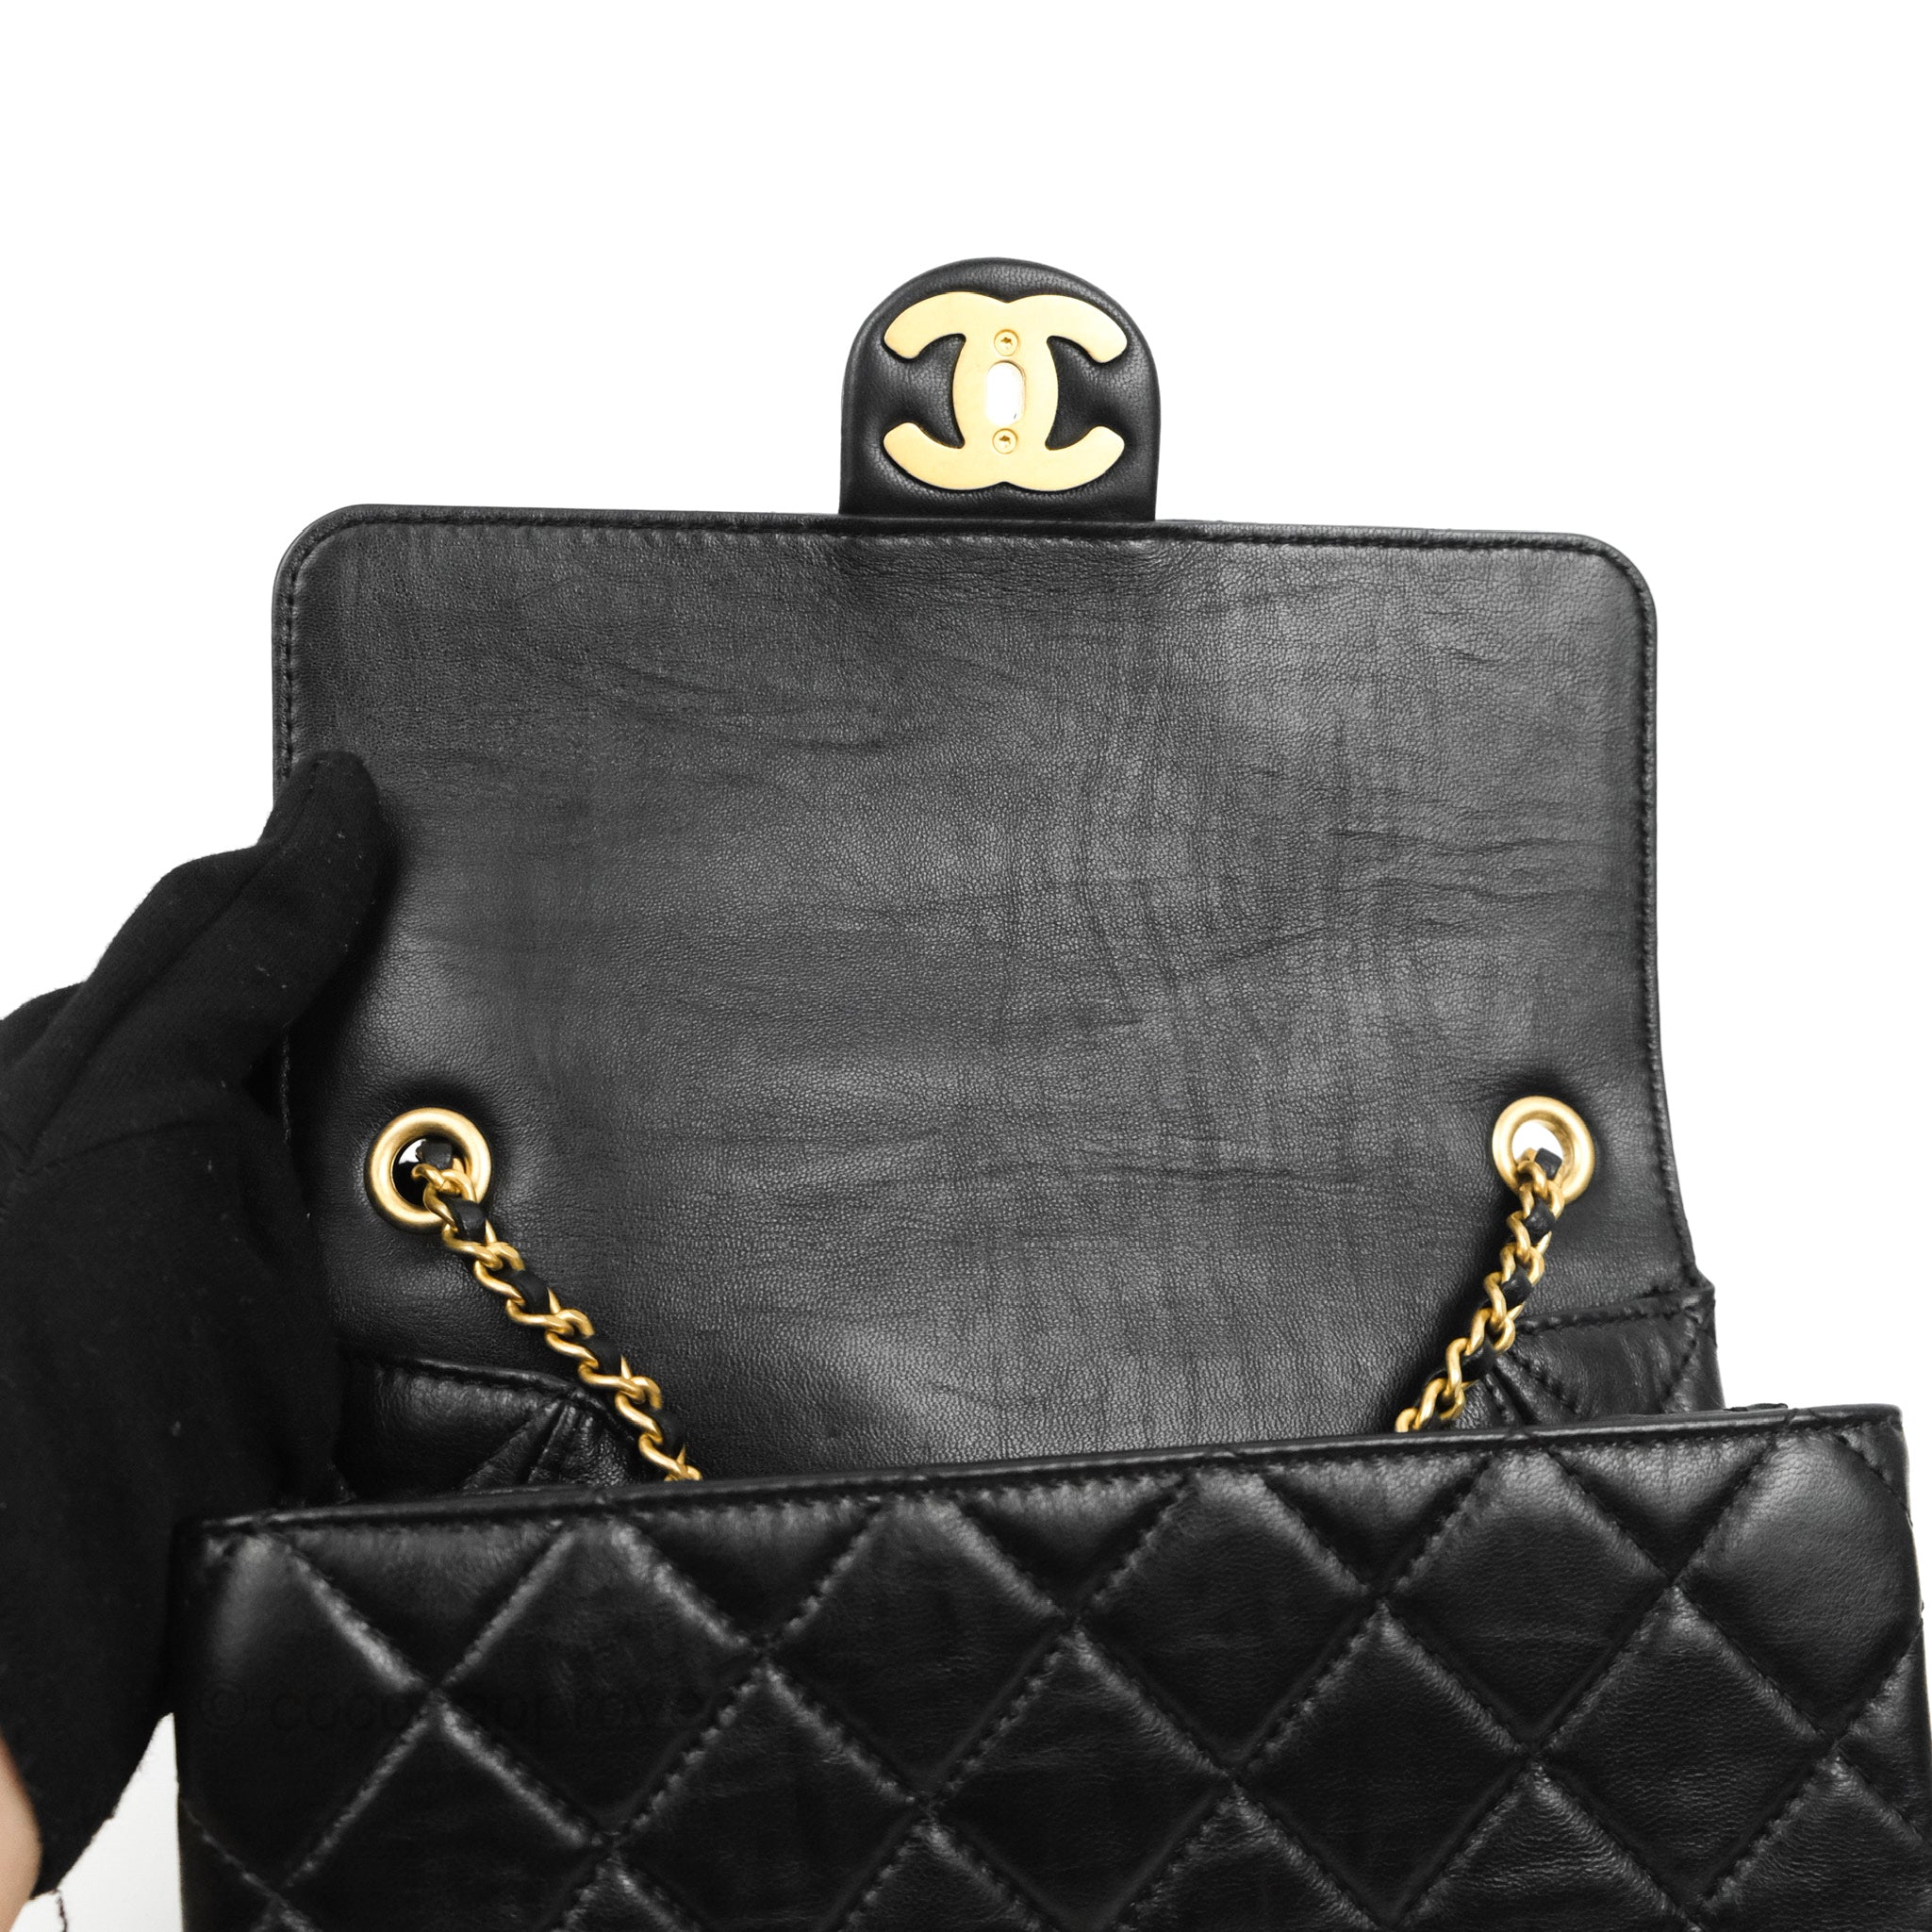 Chanel Flap Bag Black Lambskin Aged Gold Hardware – Coco Approved